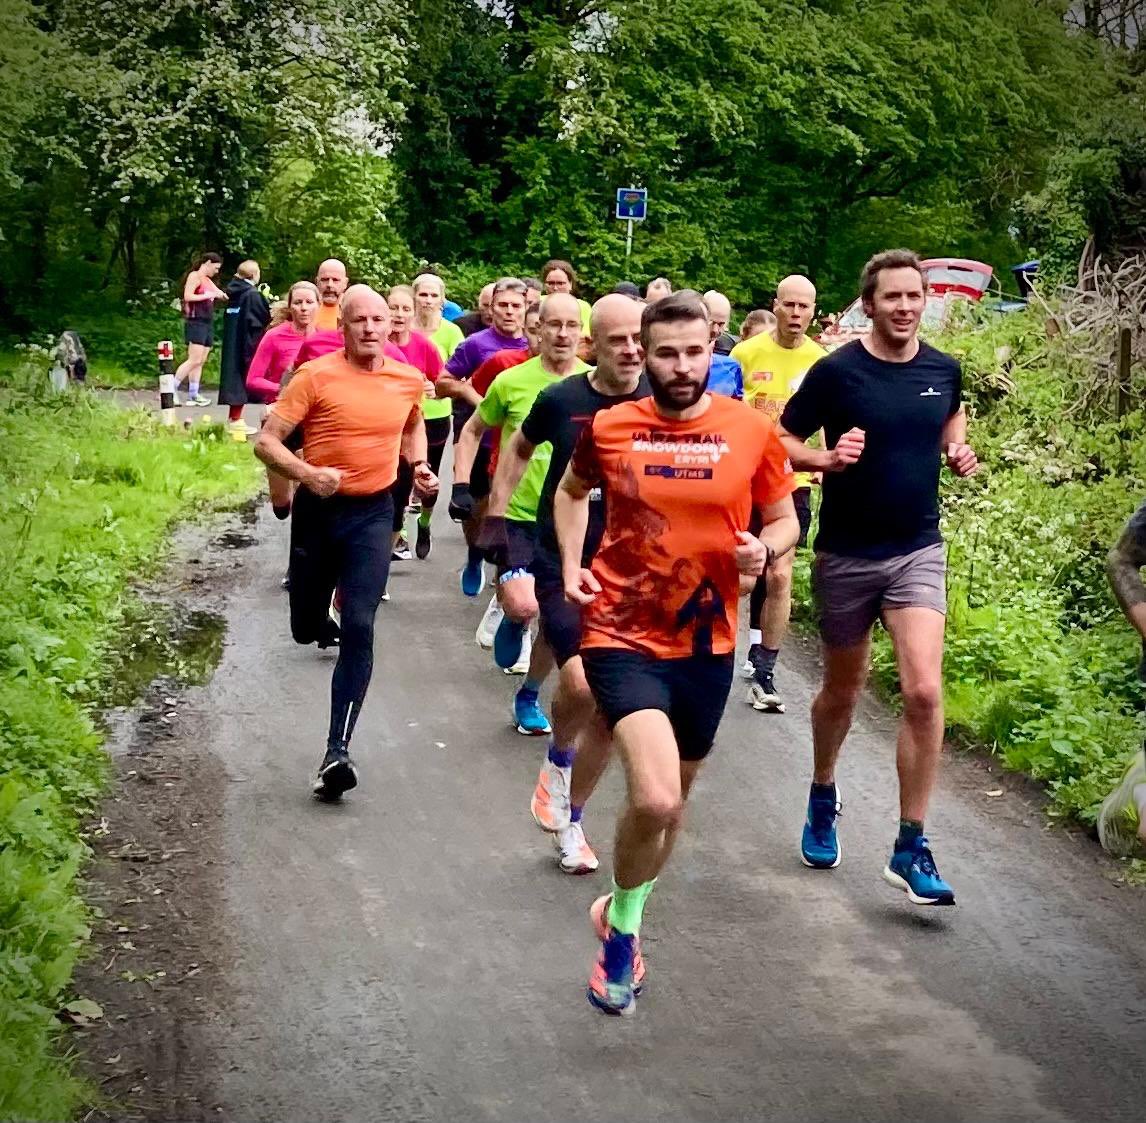 Troes Lane was @BridgendAC 🔵&🟡 last night - no better way to improve than train with a group…. Thanks to those on the stopwatches as always #nopainnogain